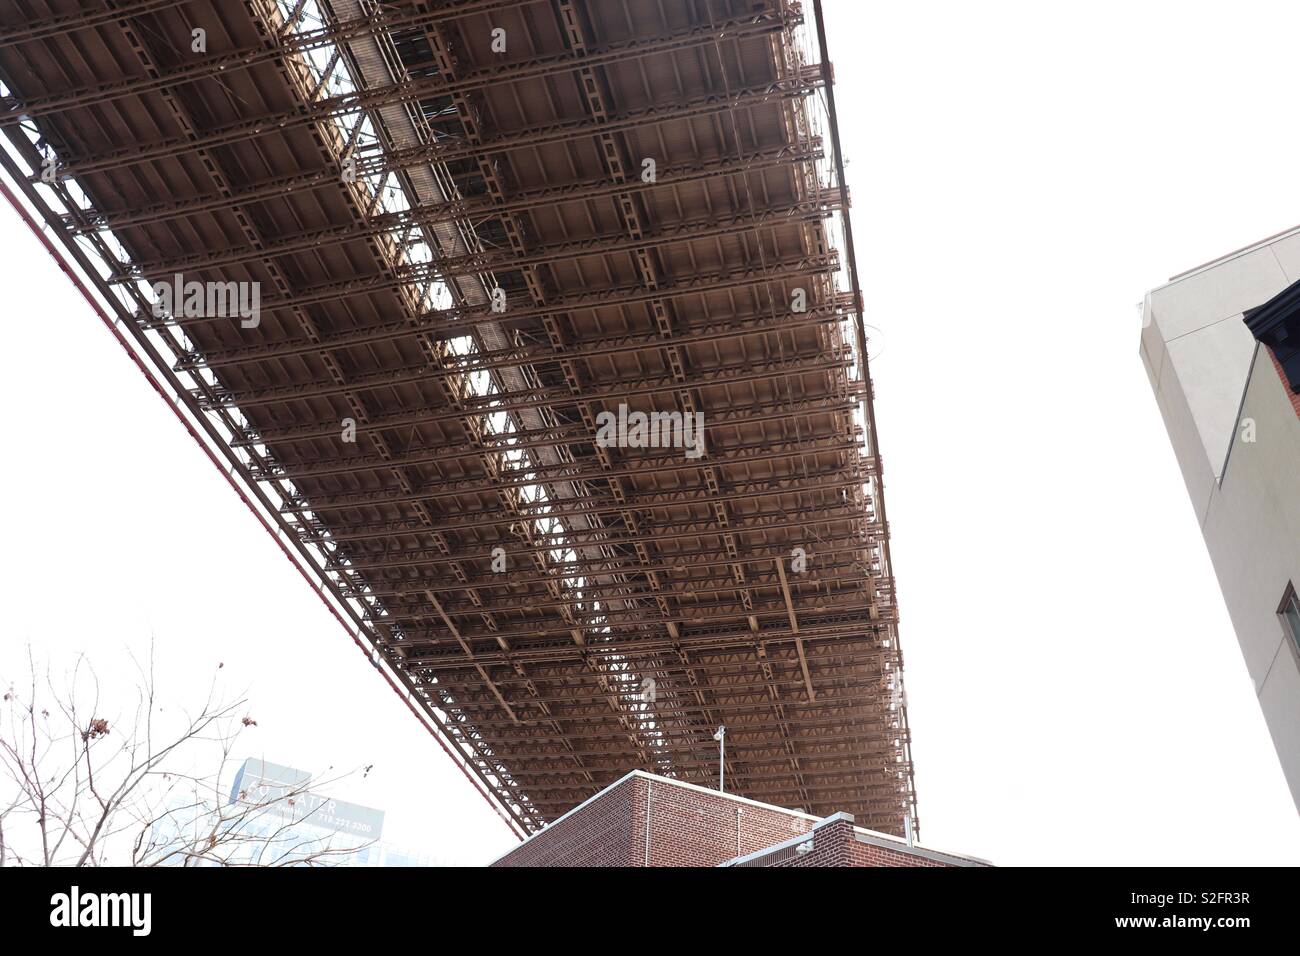 View from the underside of Brooklyn Bridge Stock Photo